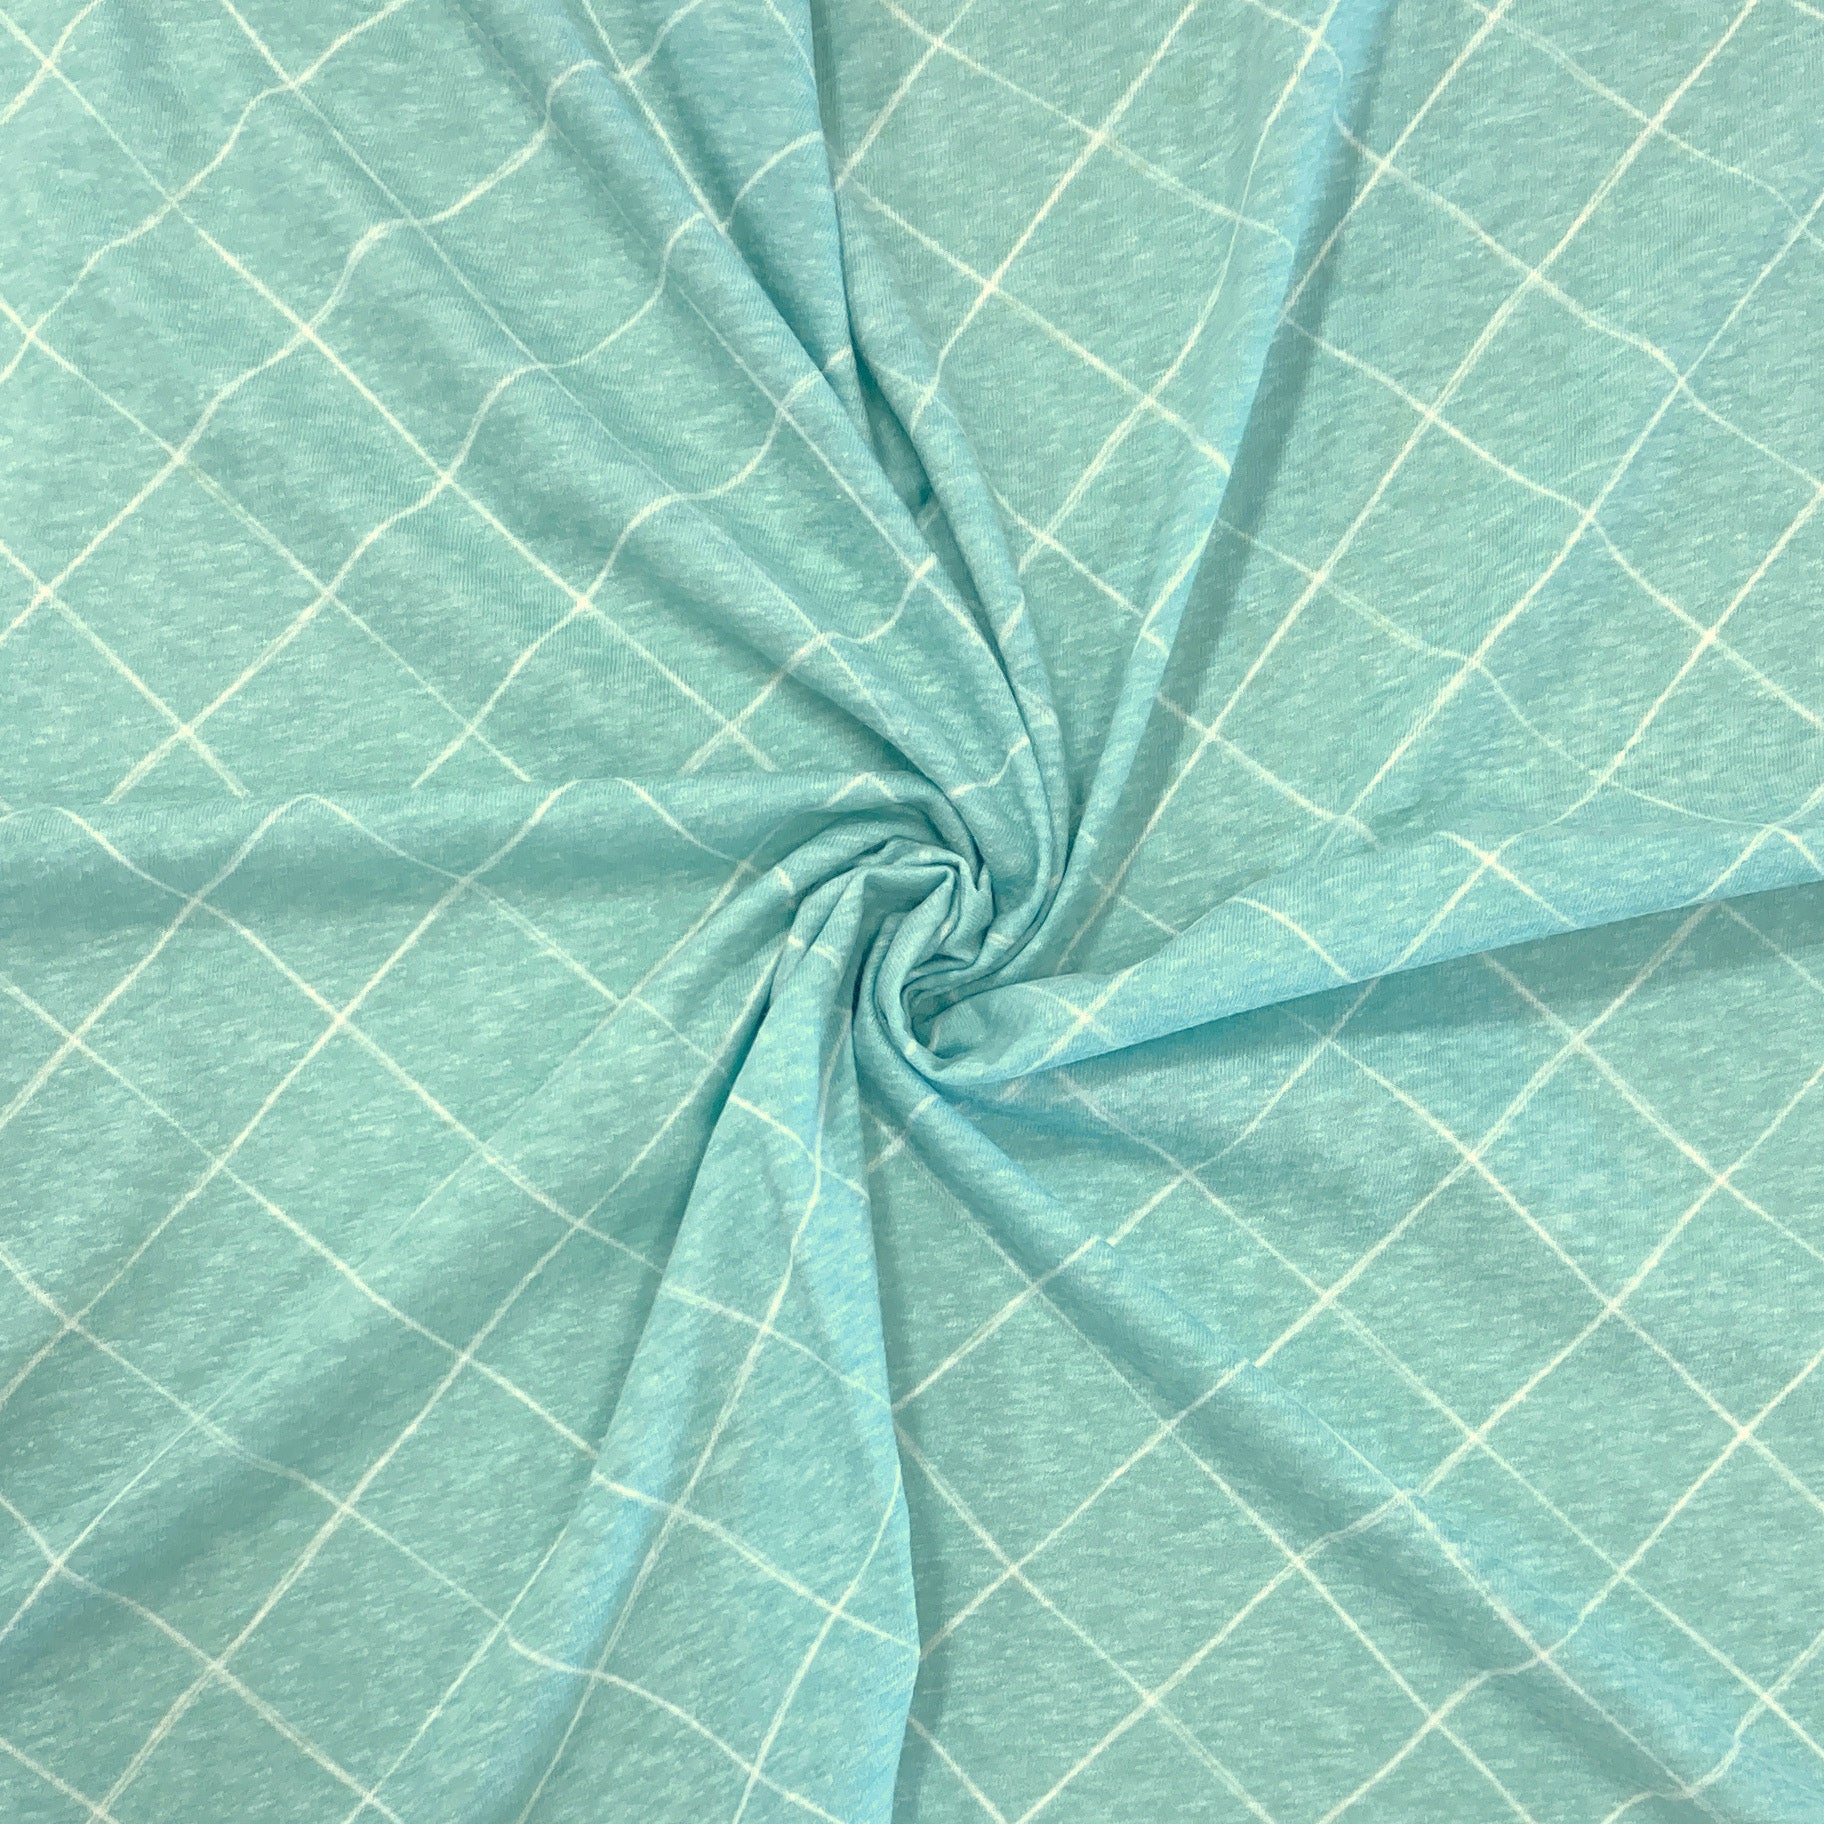 Deep Mint and White Diamond Tri-Blend Jersey Knit Fabric, Sweet Tropical by Janelle Coury for CLUB Fabrics Fabric, Raspberry Creek Fabrics